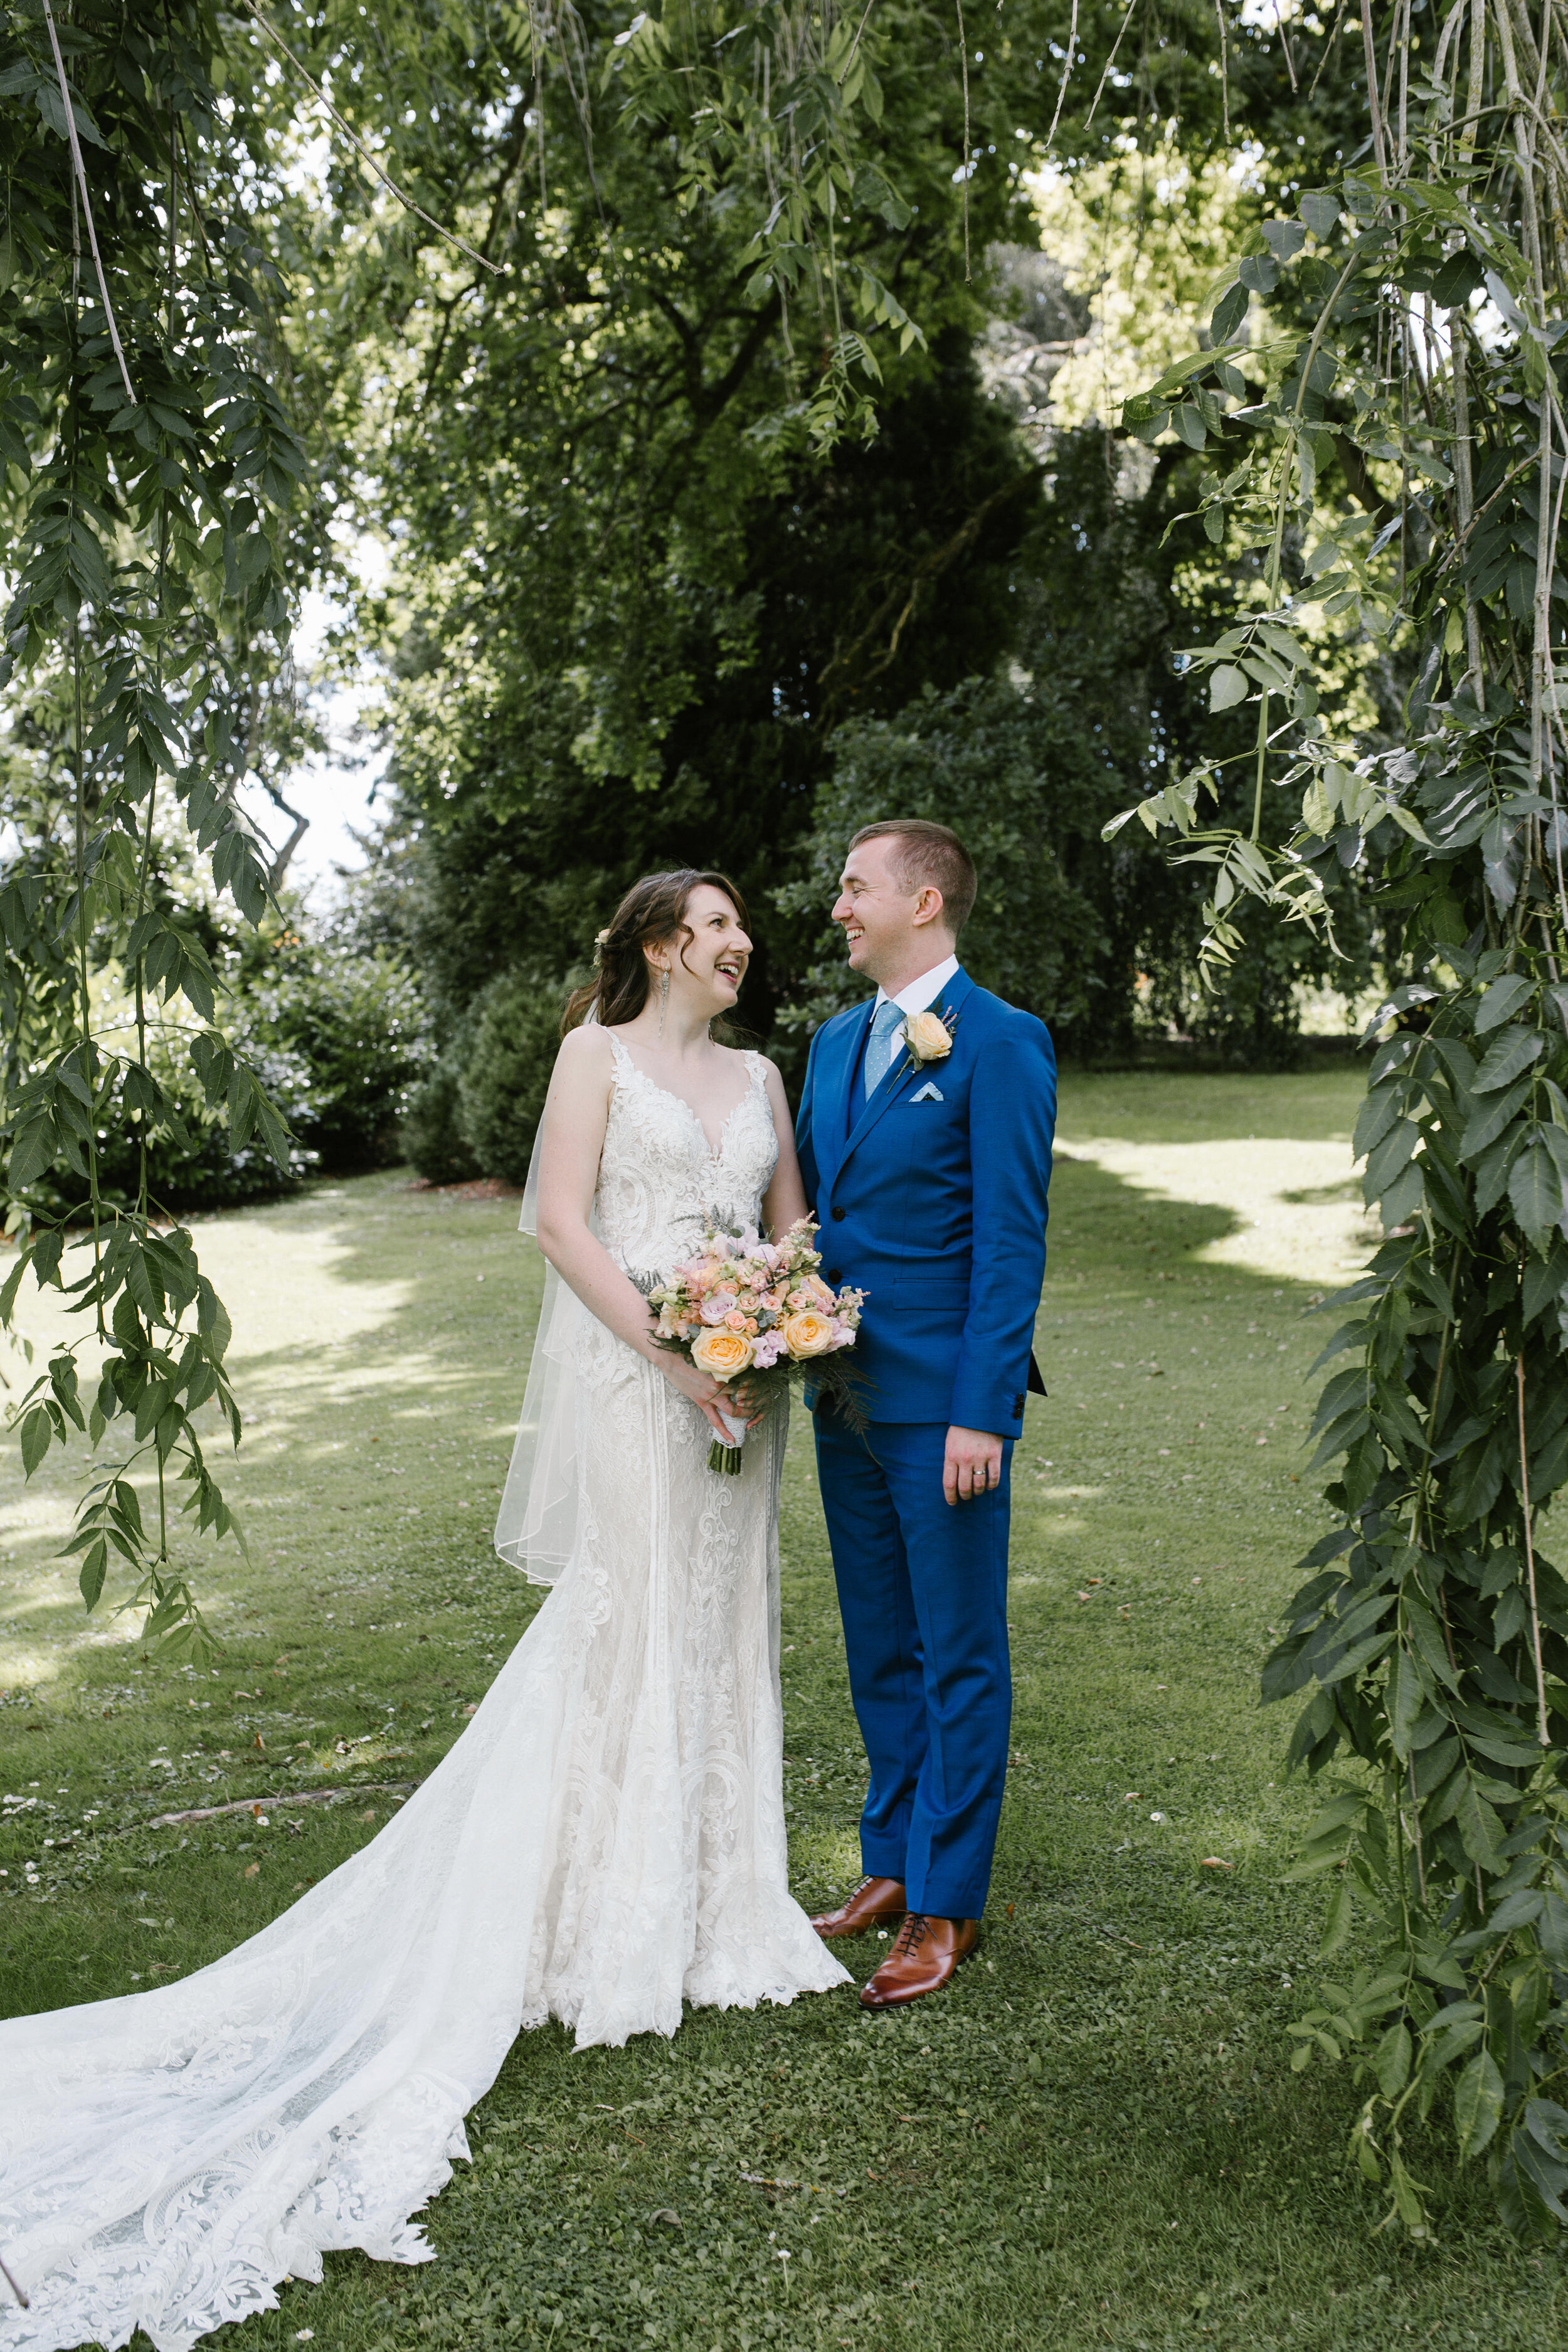 beautifully natural portrait of bride and groom together laughing in the grounds of cowley manor